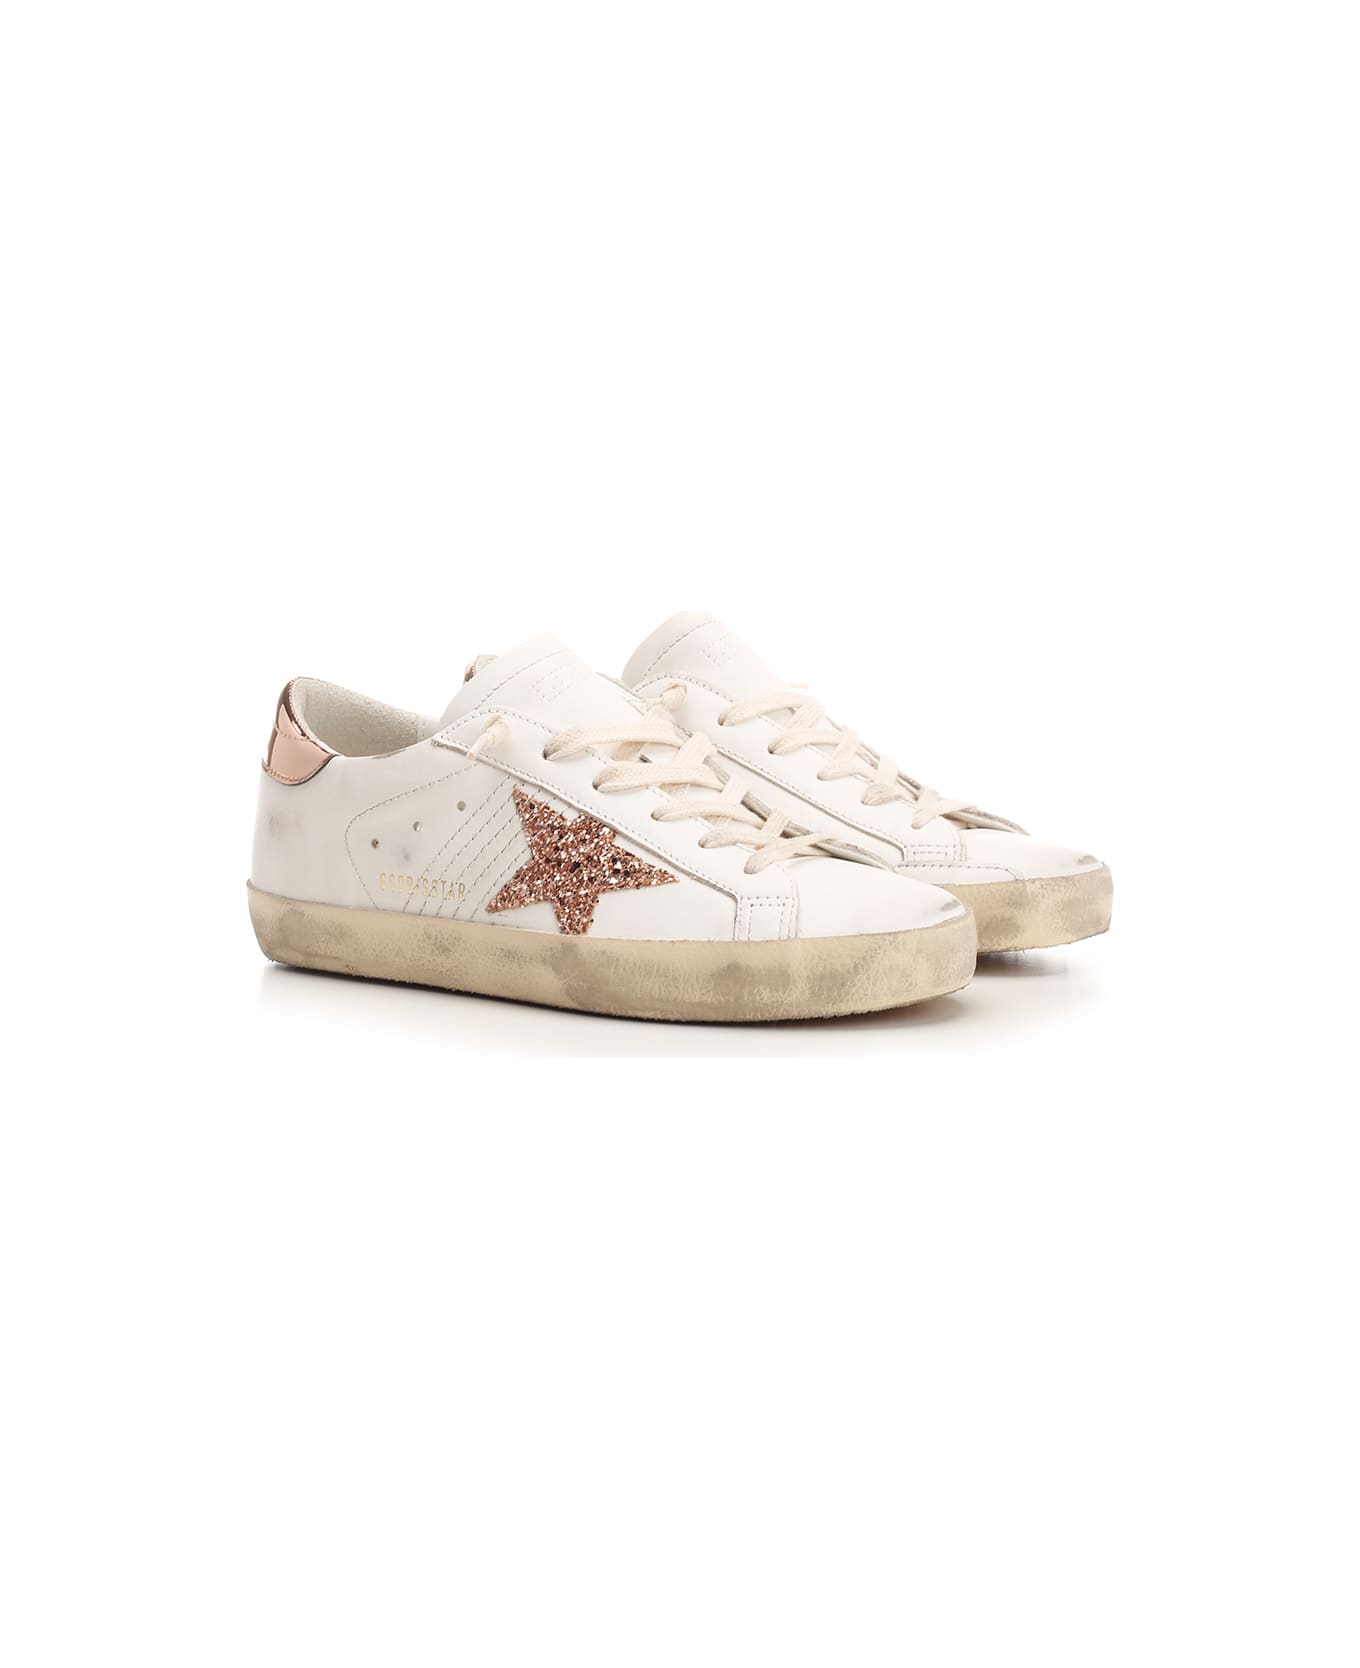 Golden Goose Superstar Classic Sneakers - WHITE/PEACH PINK/ANTIQUE ROSE